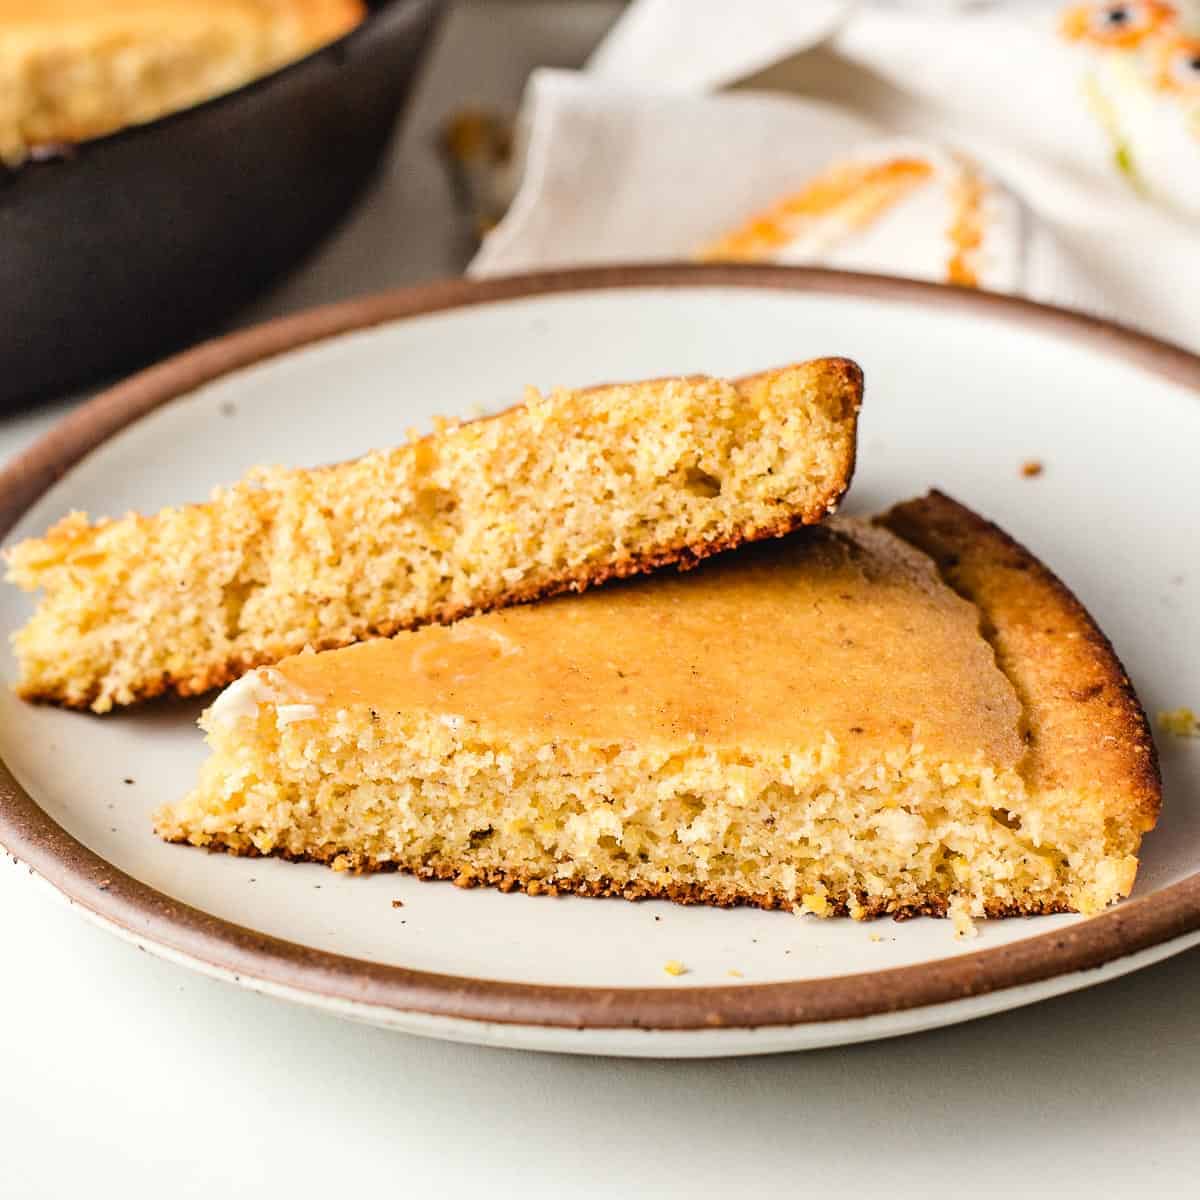 Two slices of cornbread on a plate.